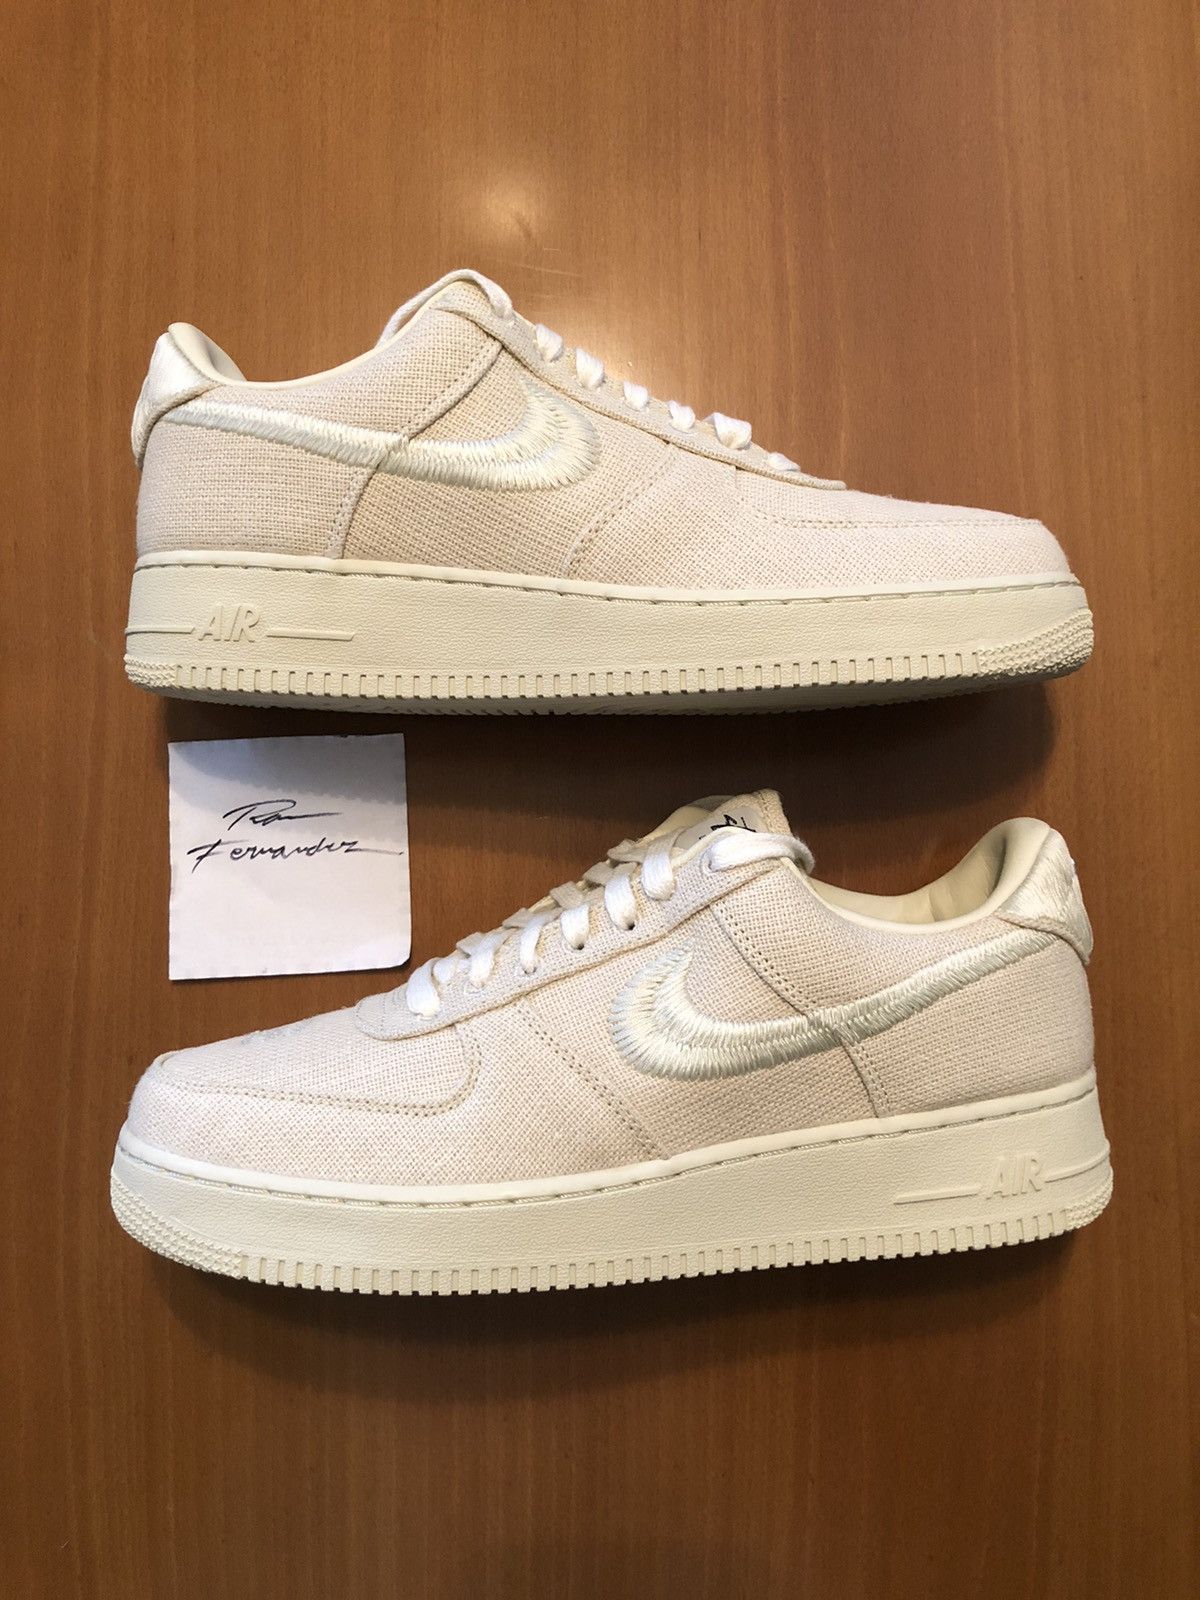 Nike Nike X Stussy Air Force 1 low fossil | Grailed